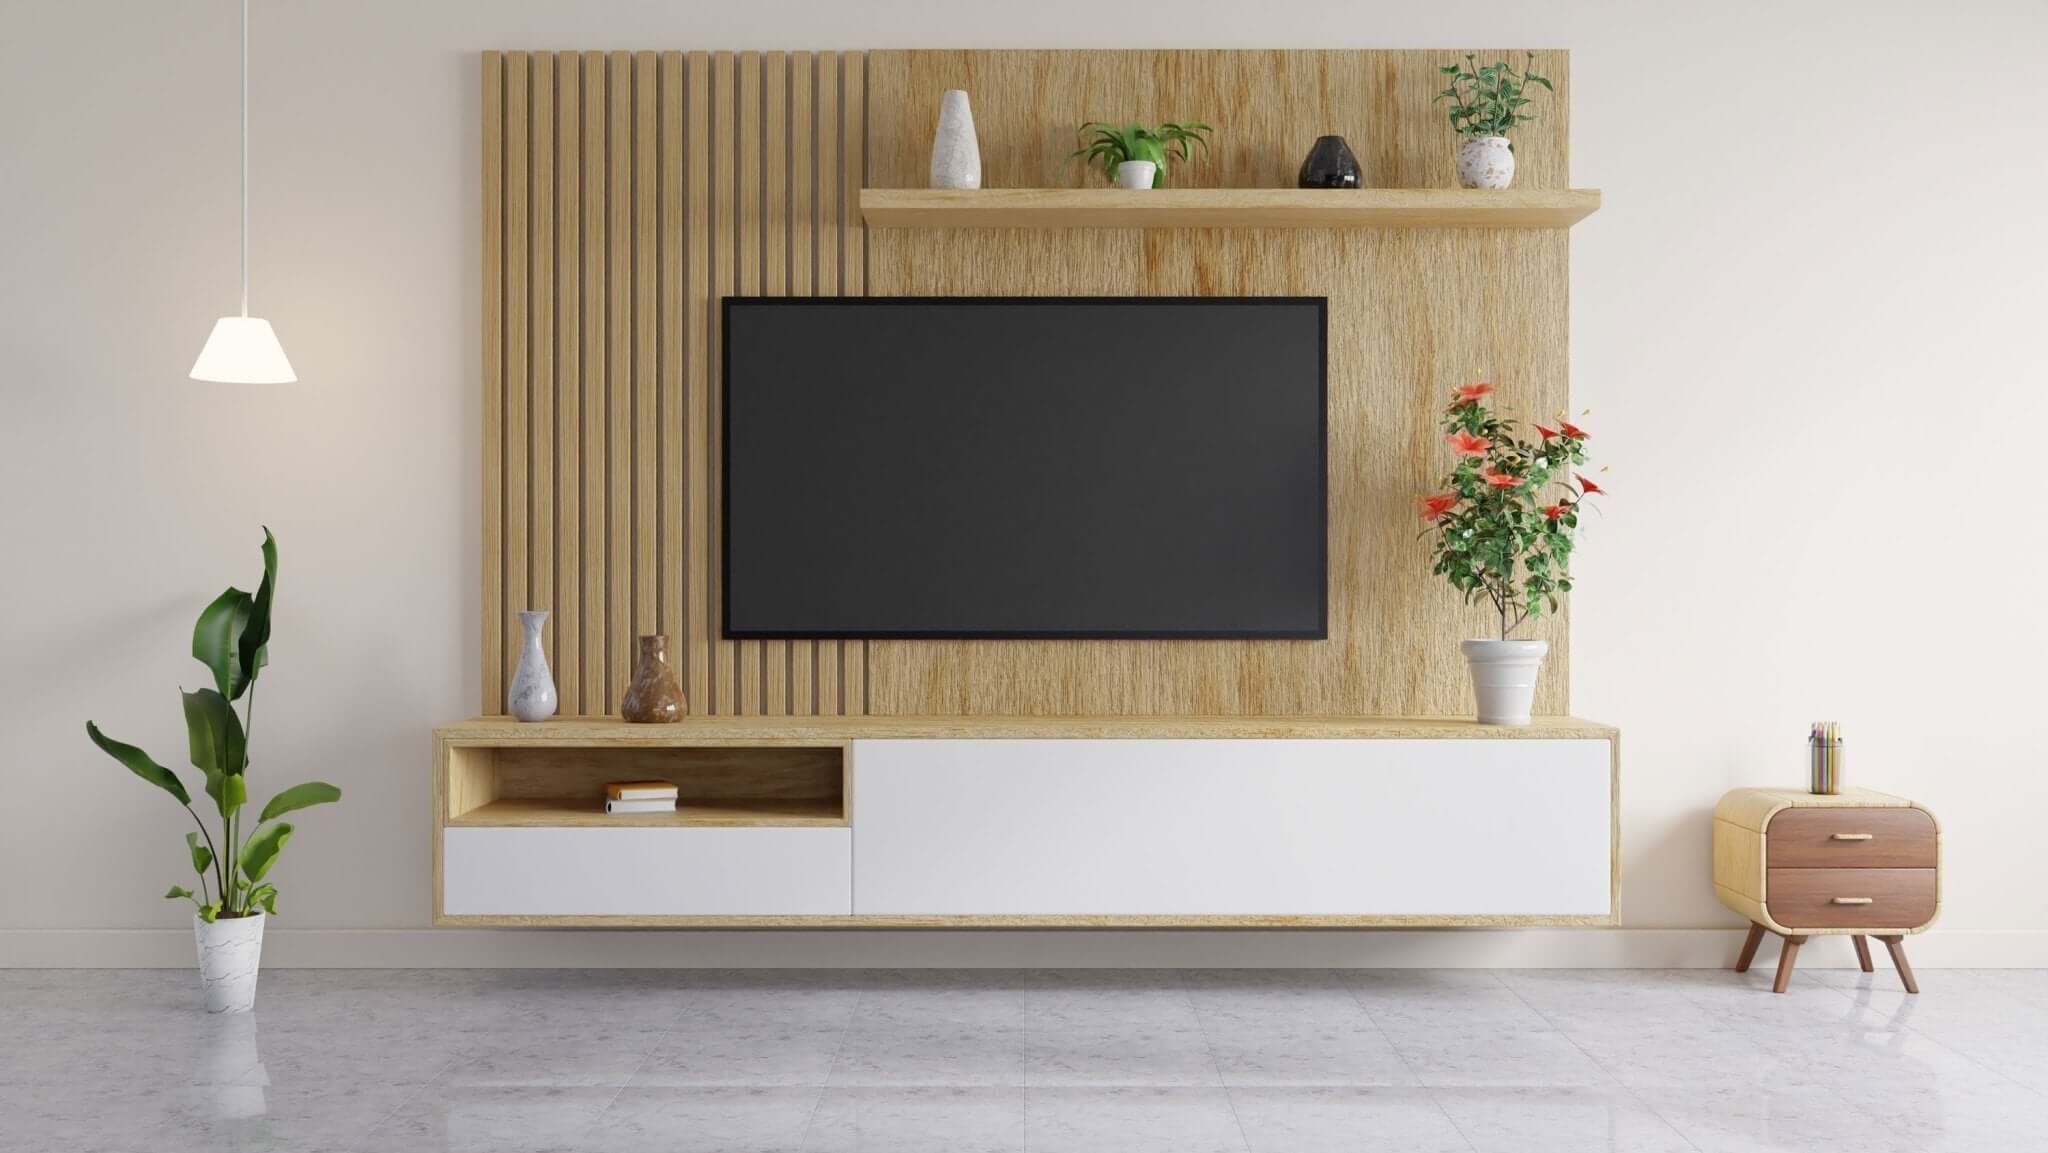 How to Conceal the Cords for Your Wall-Mounted Living Room TV